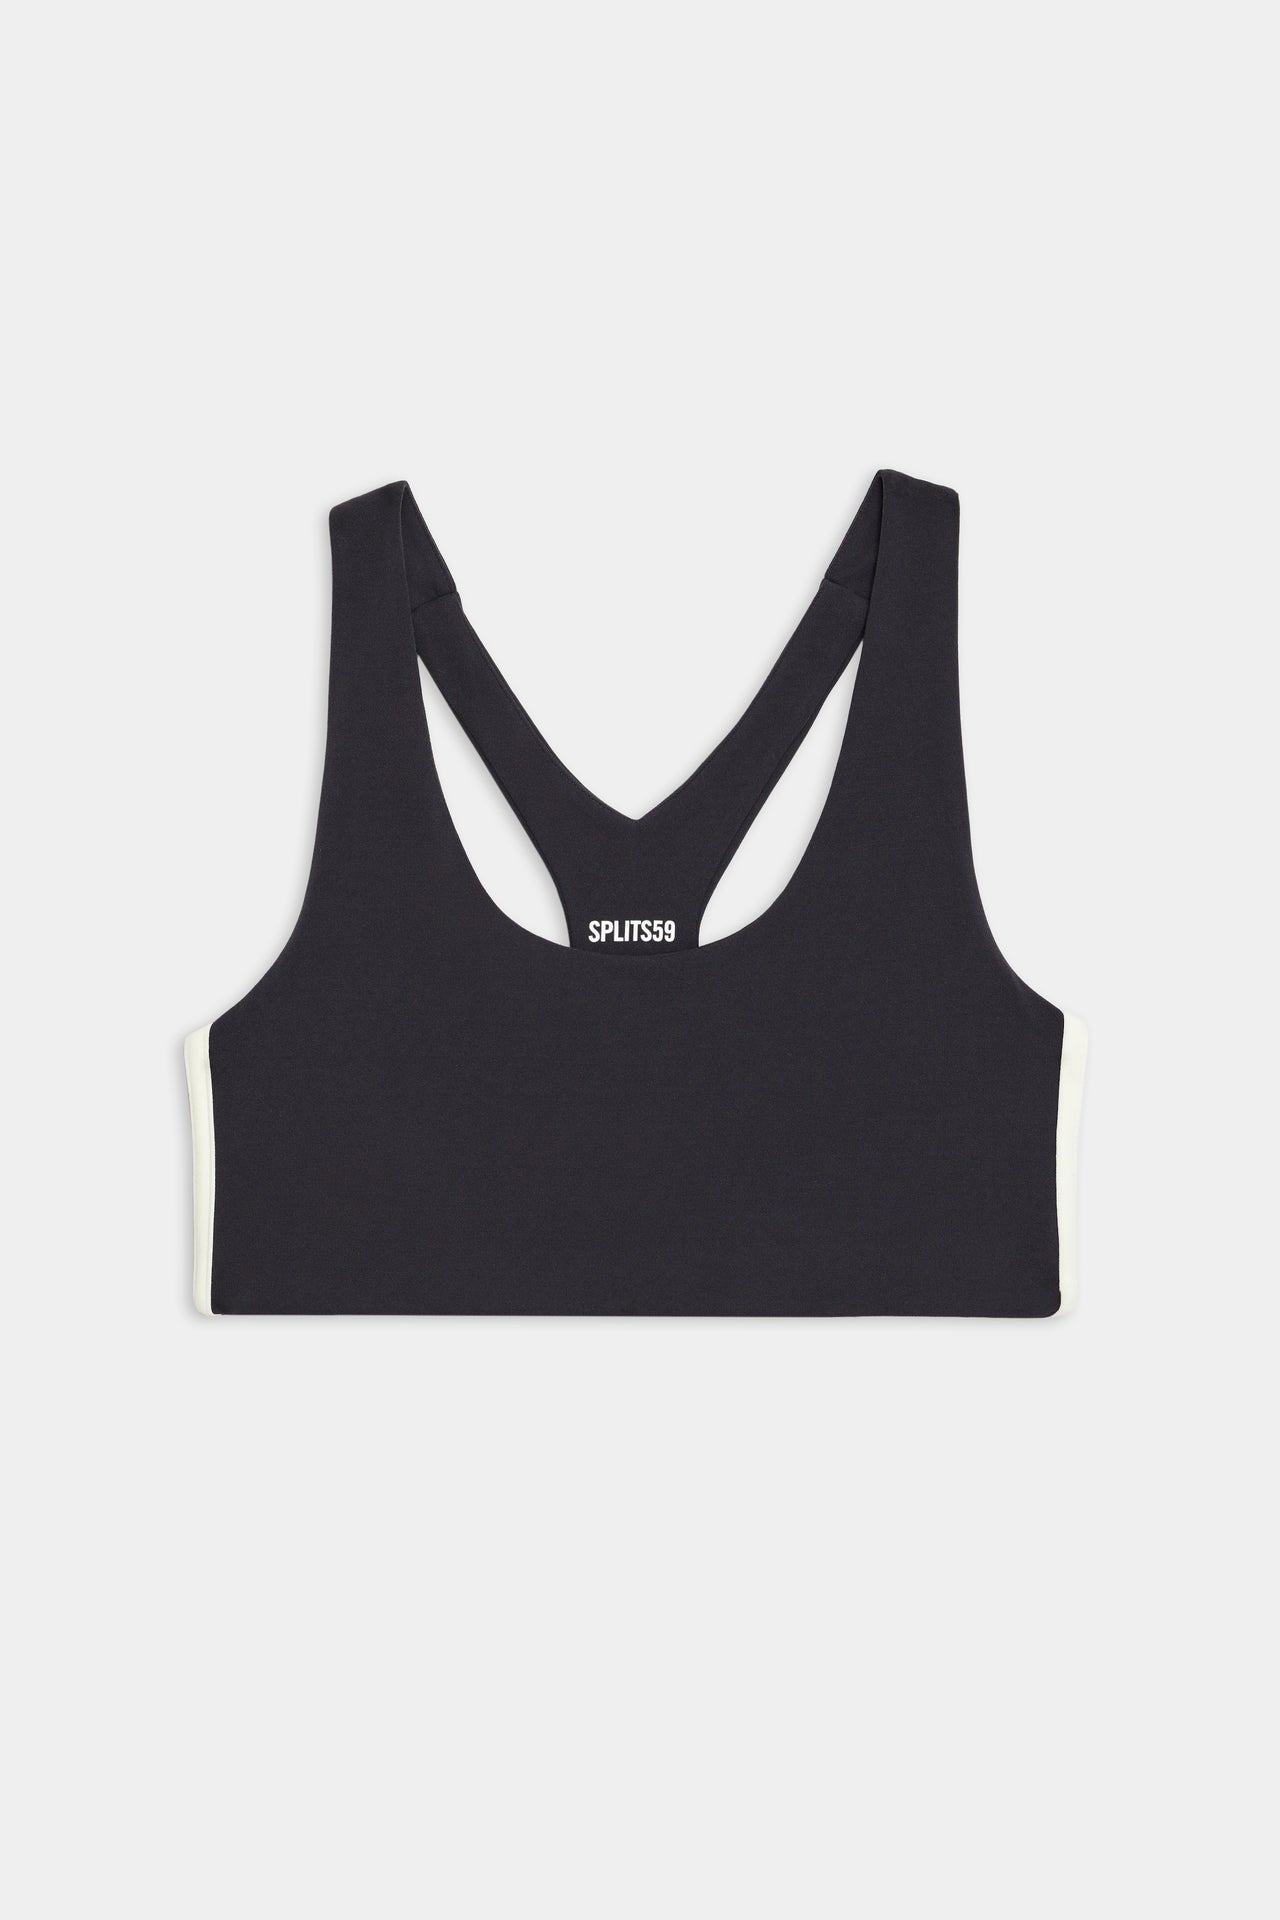 Flat view of dark grey sports bra with a thin white and black stripes down the side